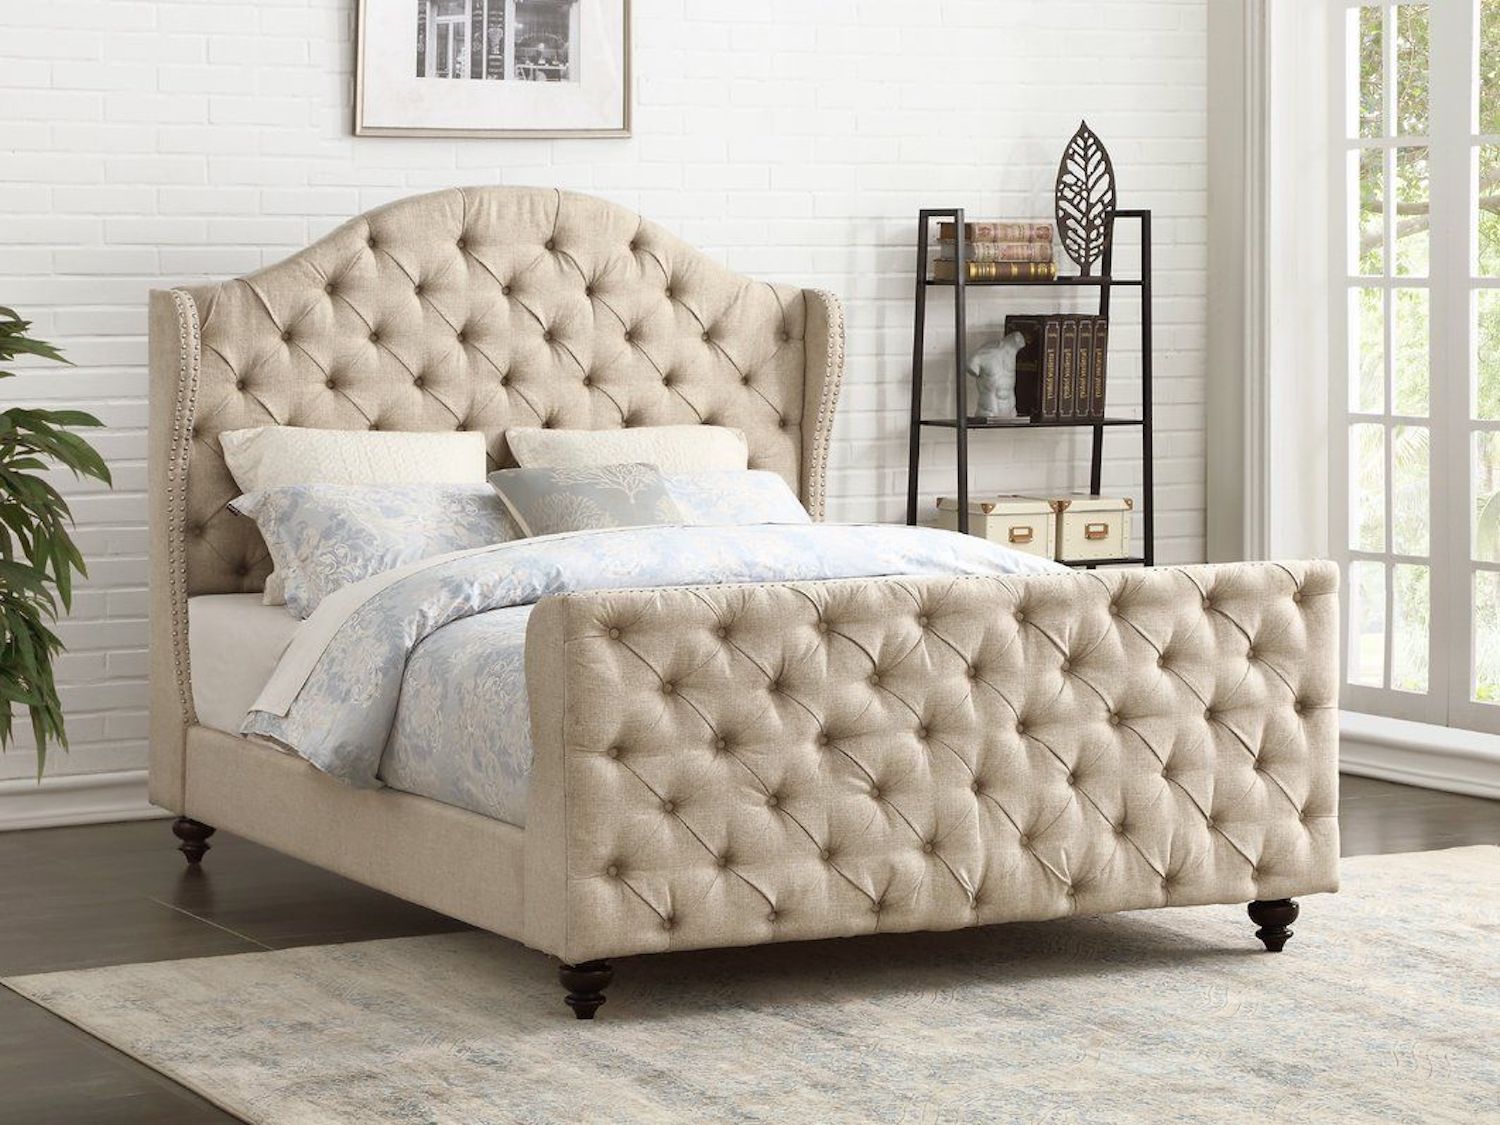 Designer Collection Beige Fabric Bed With Diamond Button Tufting